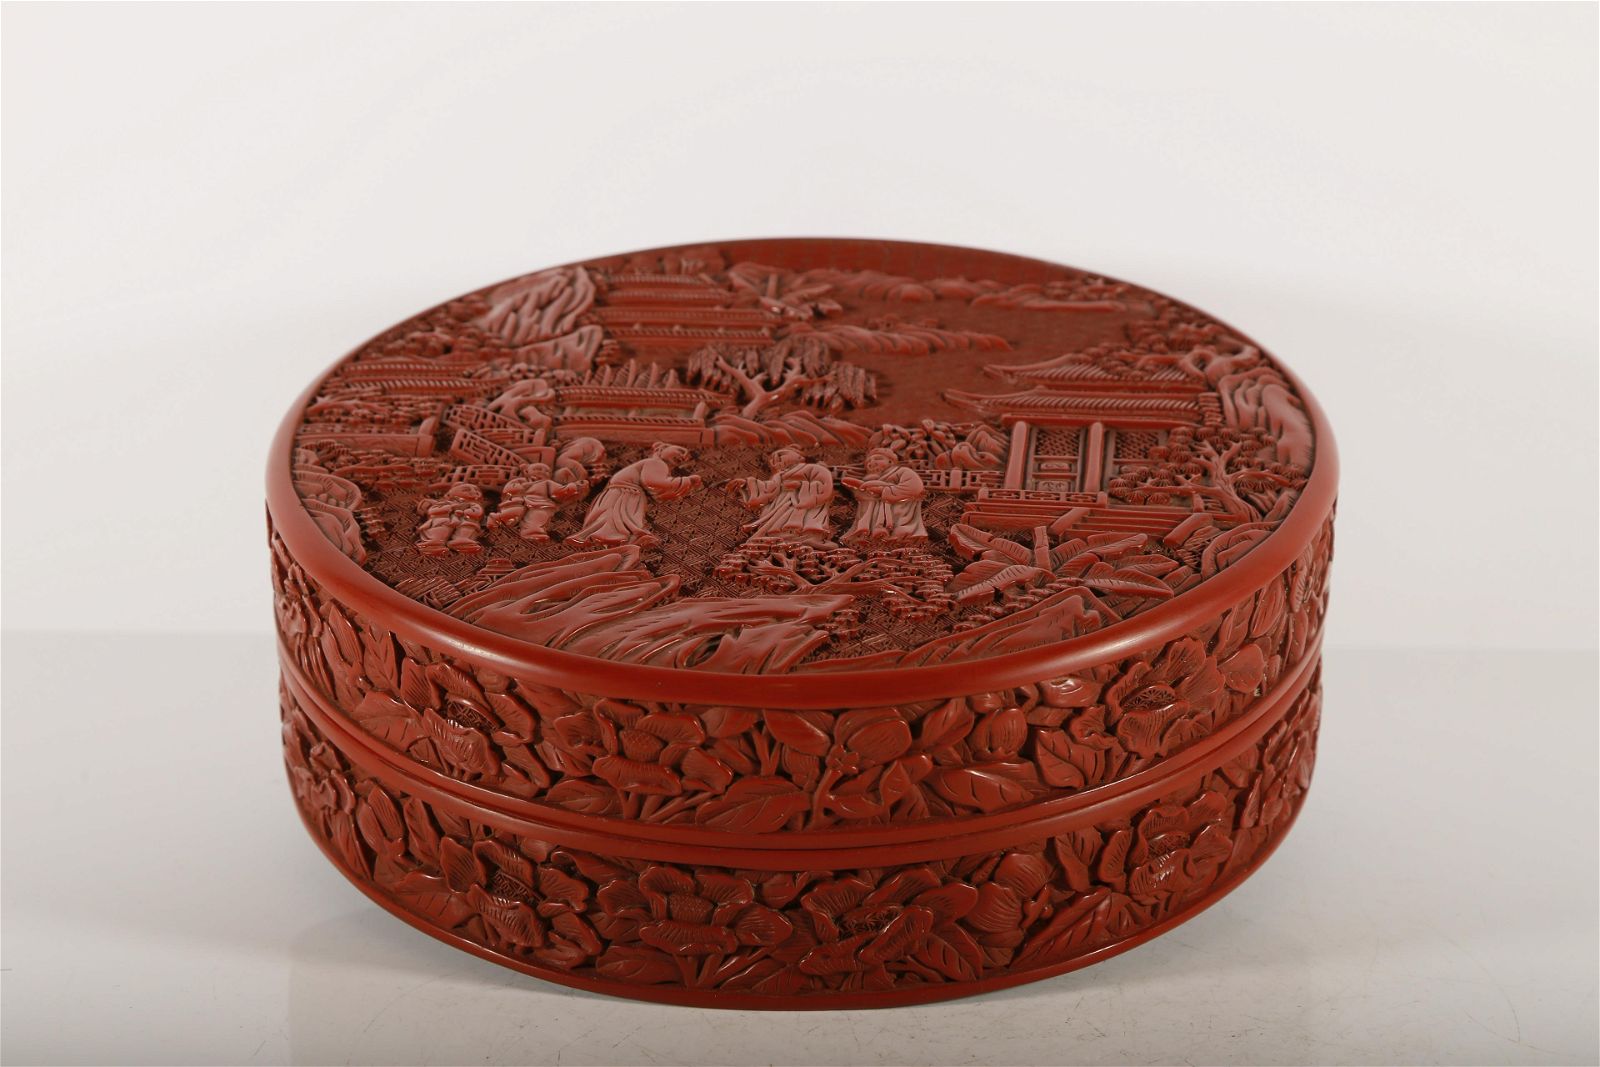 A FINE RED CARVED LACQUER FIGURE  3d0d83